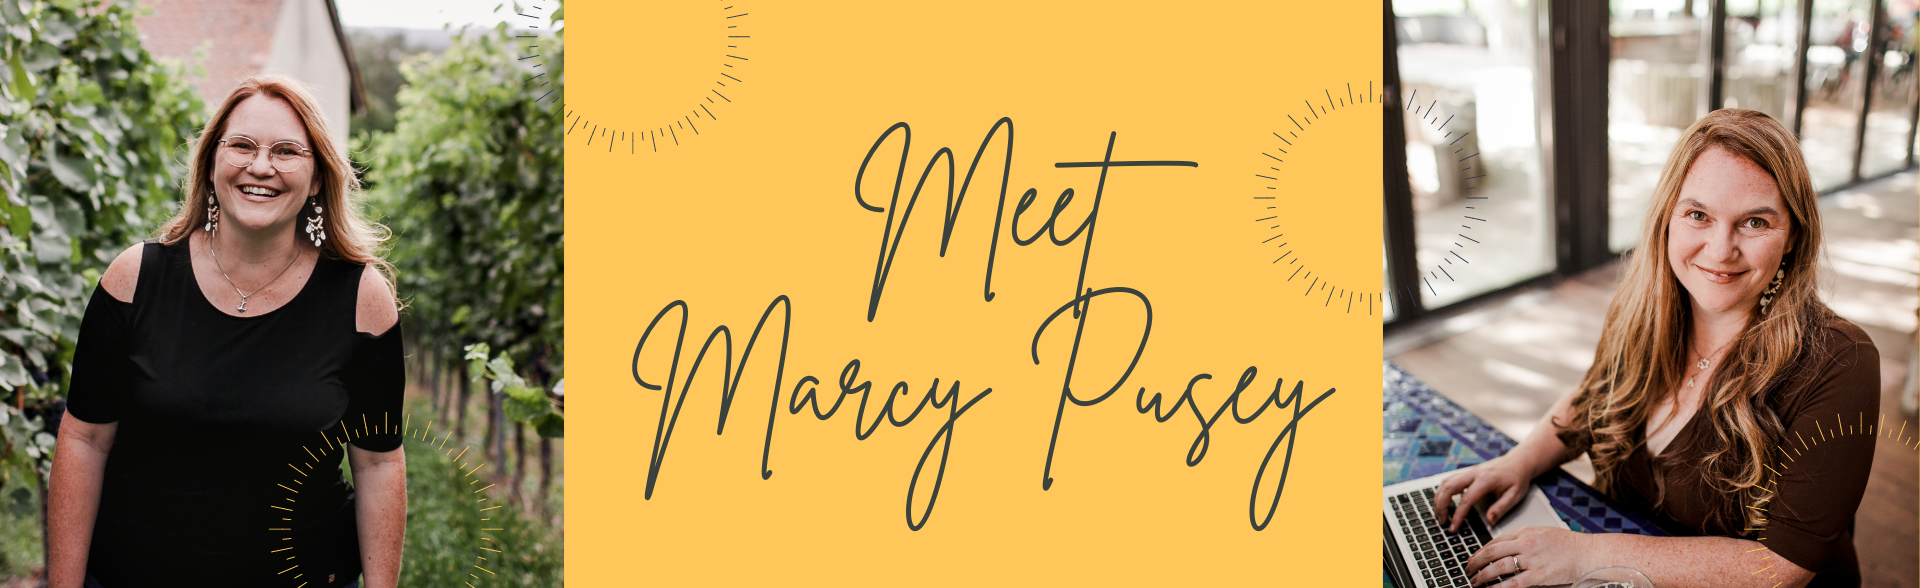 Marcy Pusey